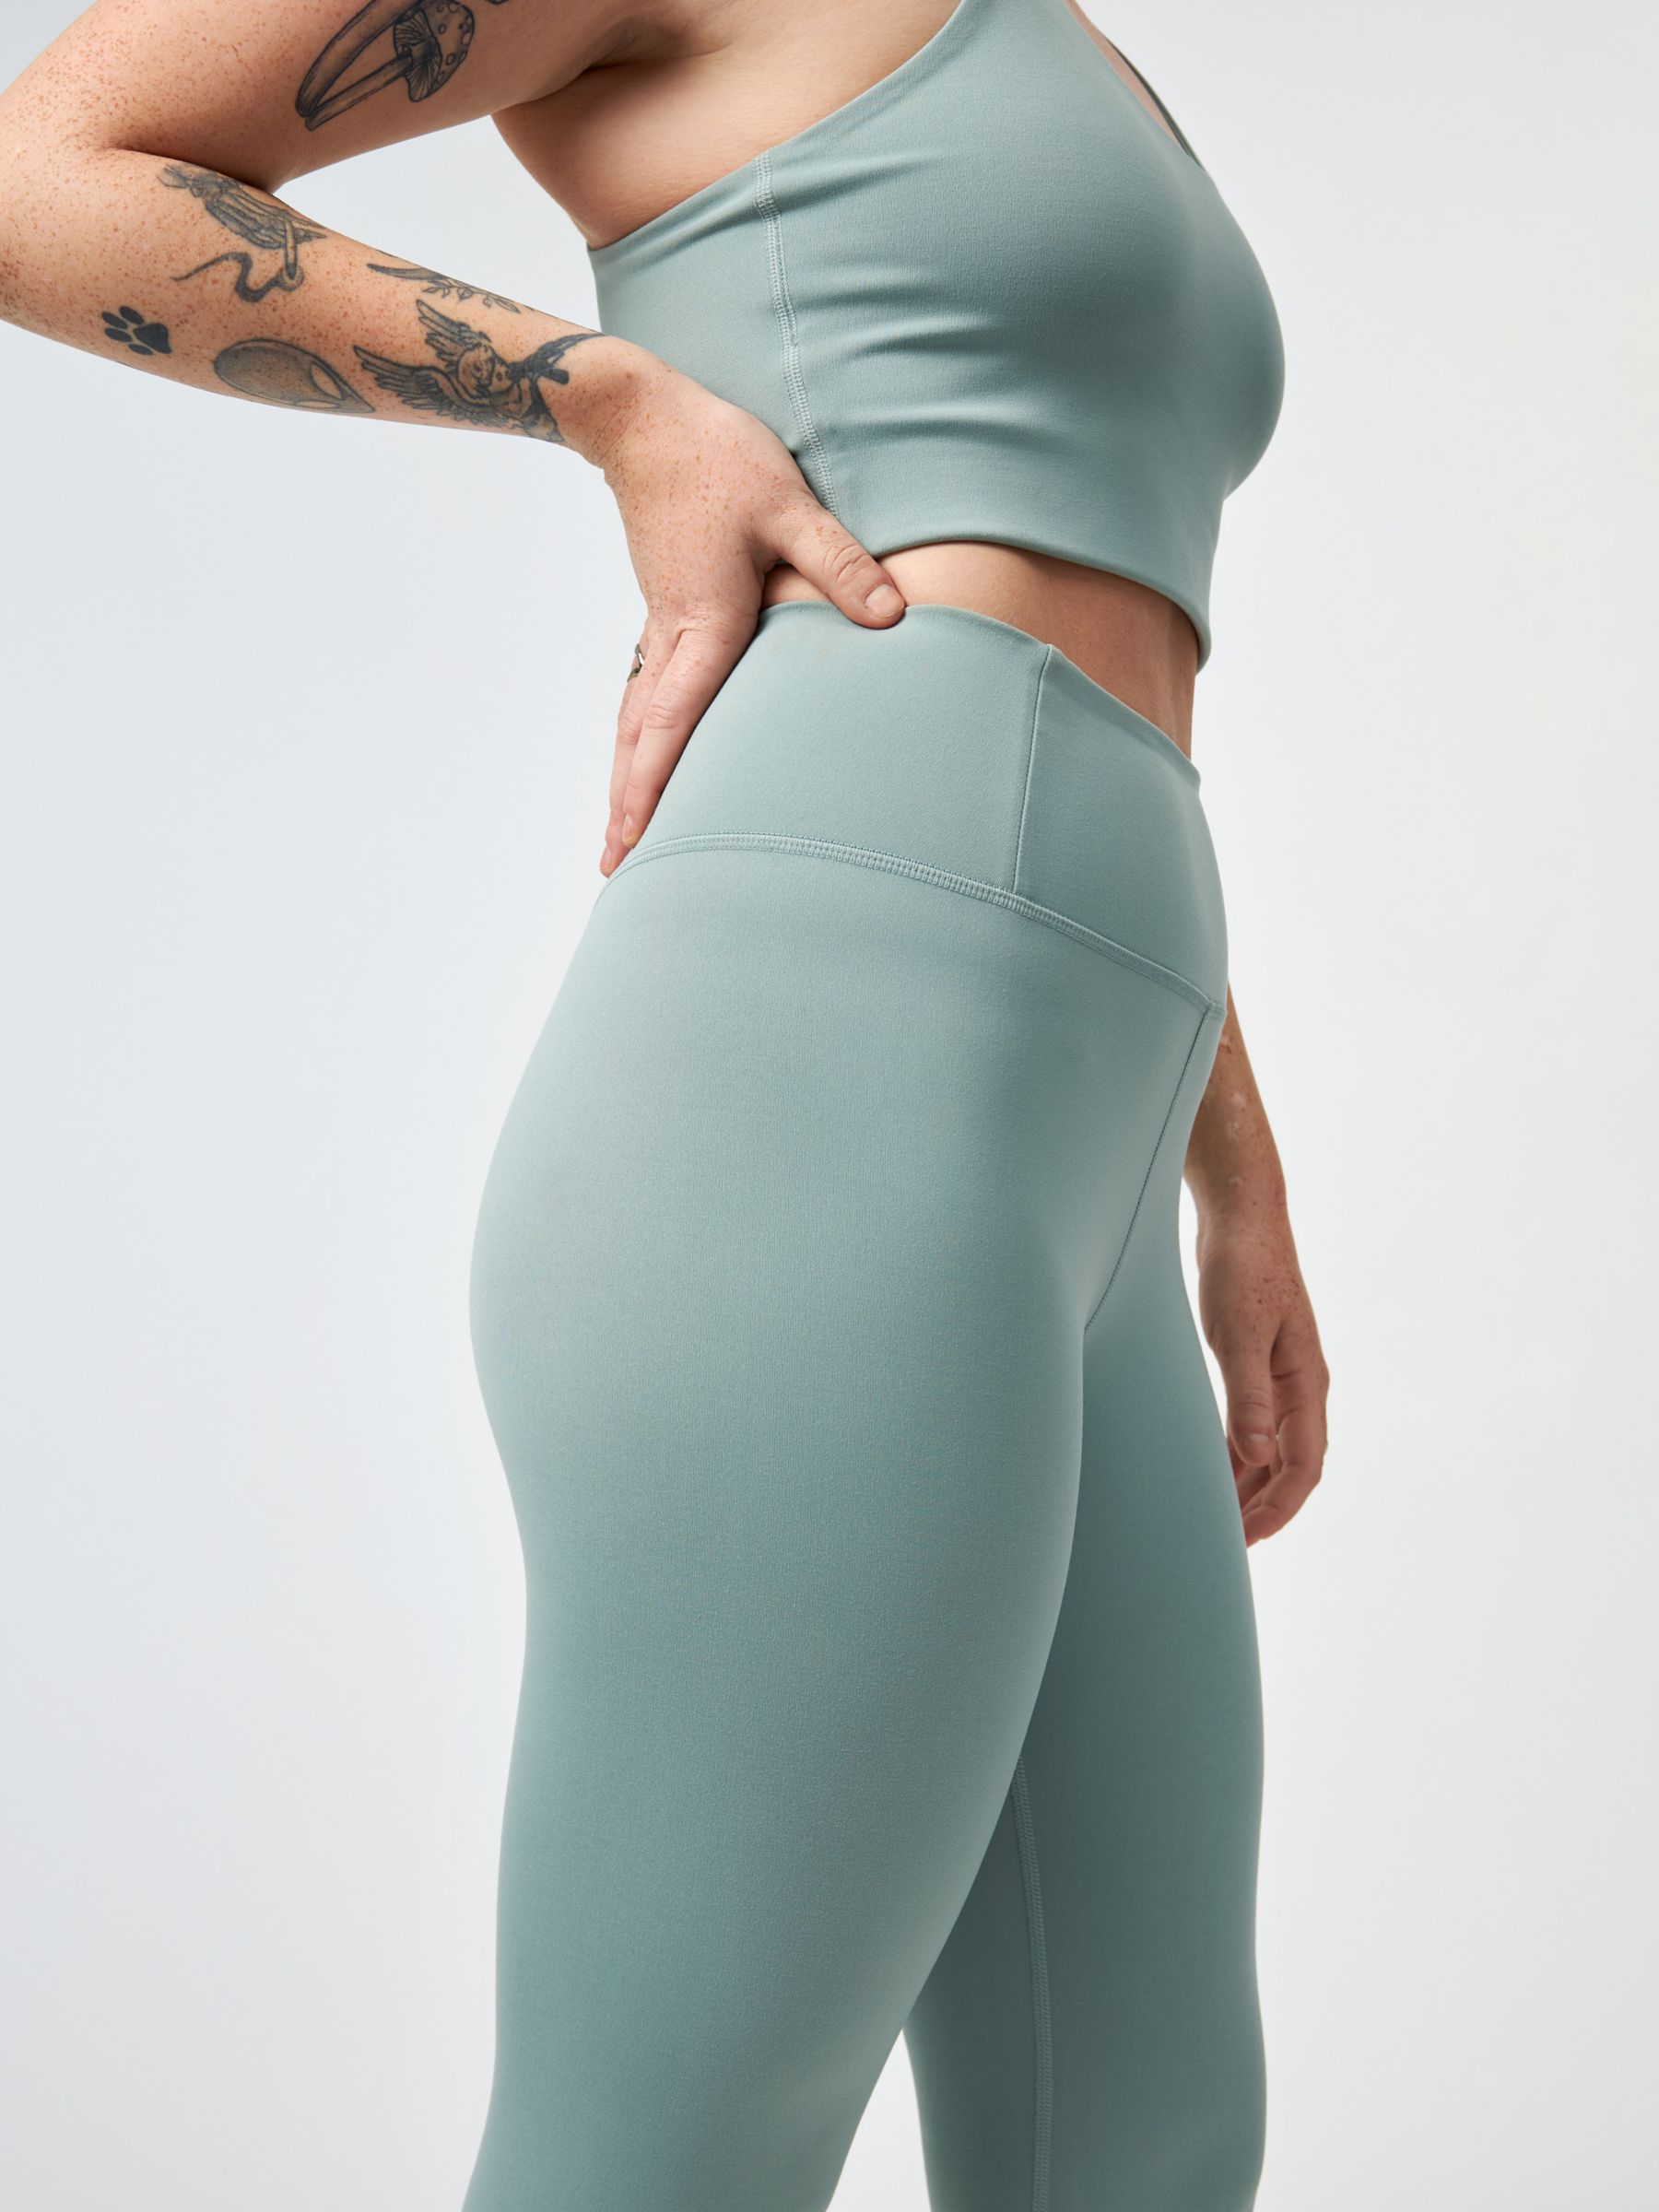 FLOAT (soft) High-Rise Legging by Girlfriend Collective – Girl on